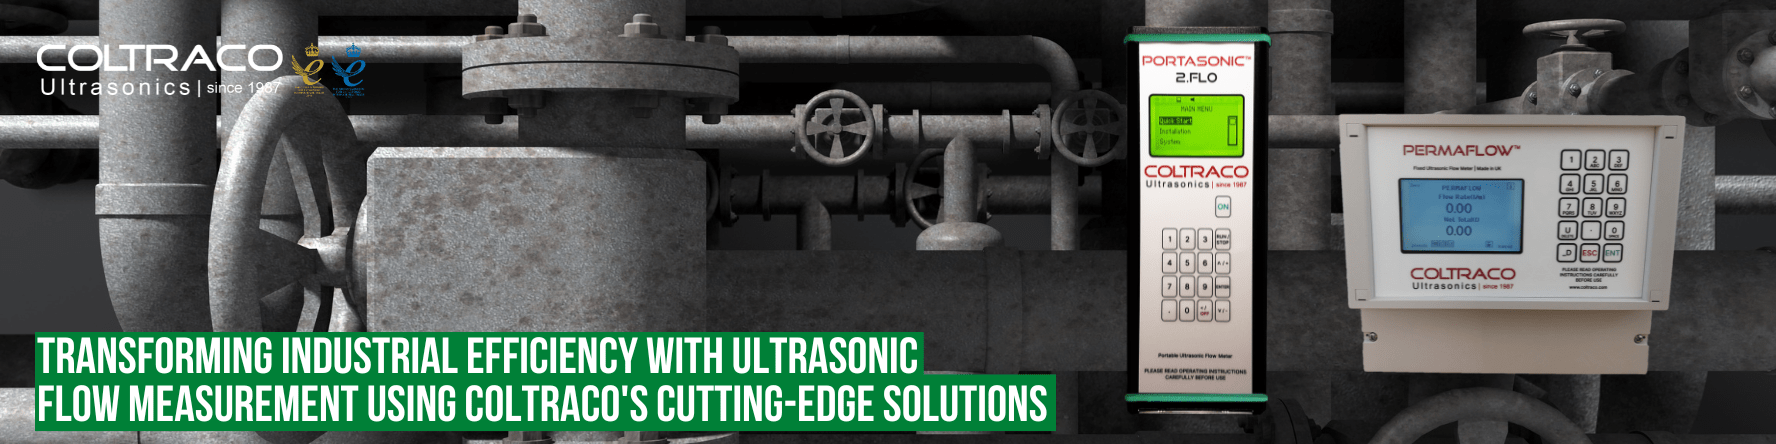 Transforming Industrial Efficiency with Ultrasonic Flow Measurement using Coltraco's Cutting-Edge Solutions